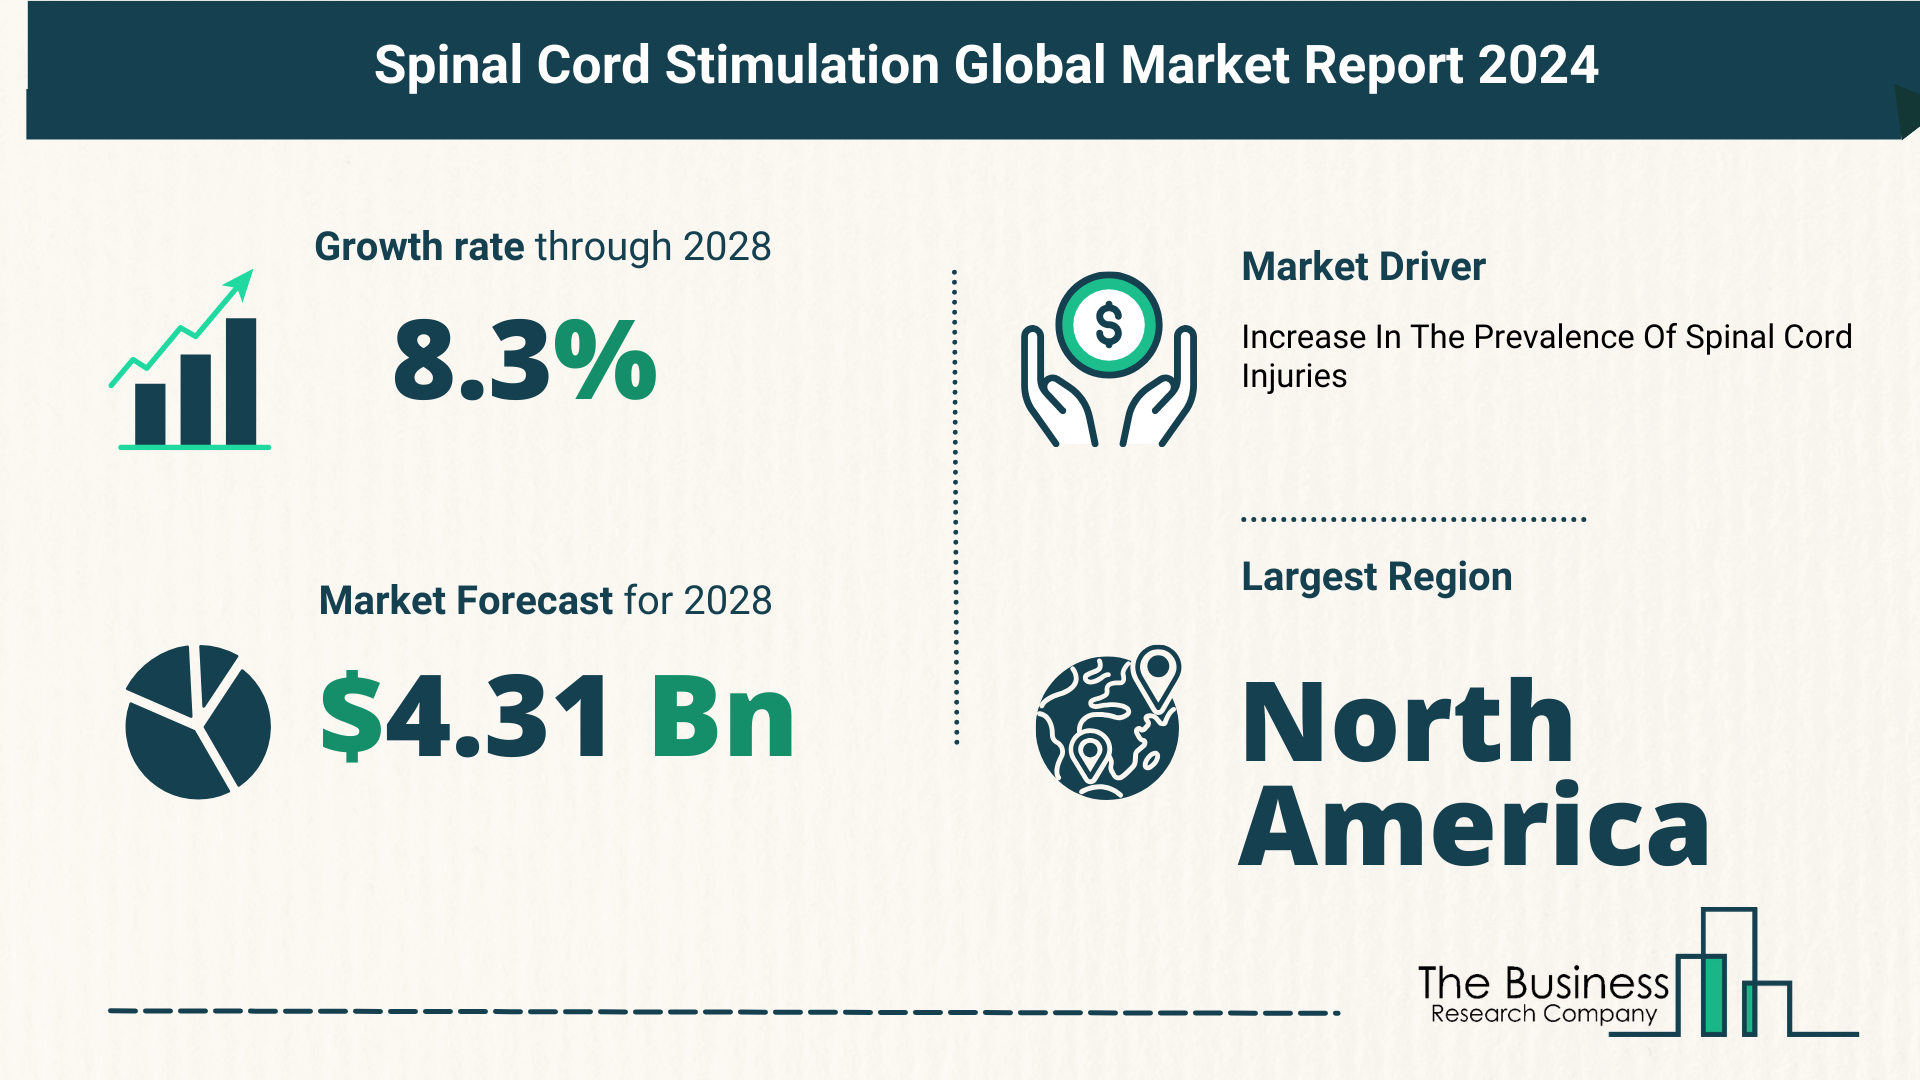 What Is The Forecast Growth Rate For The Spinal Cord Stimulation Market?